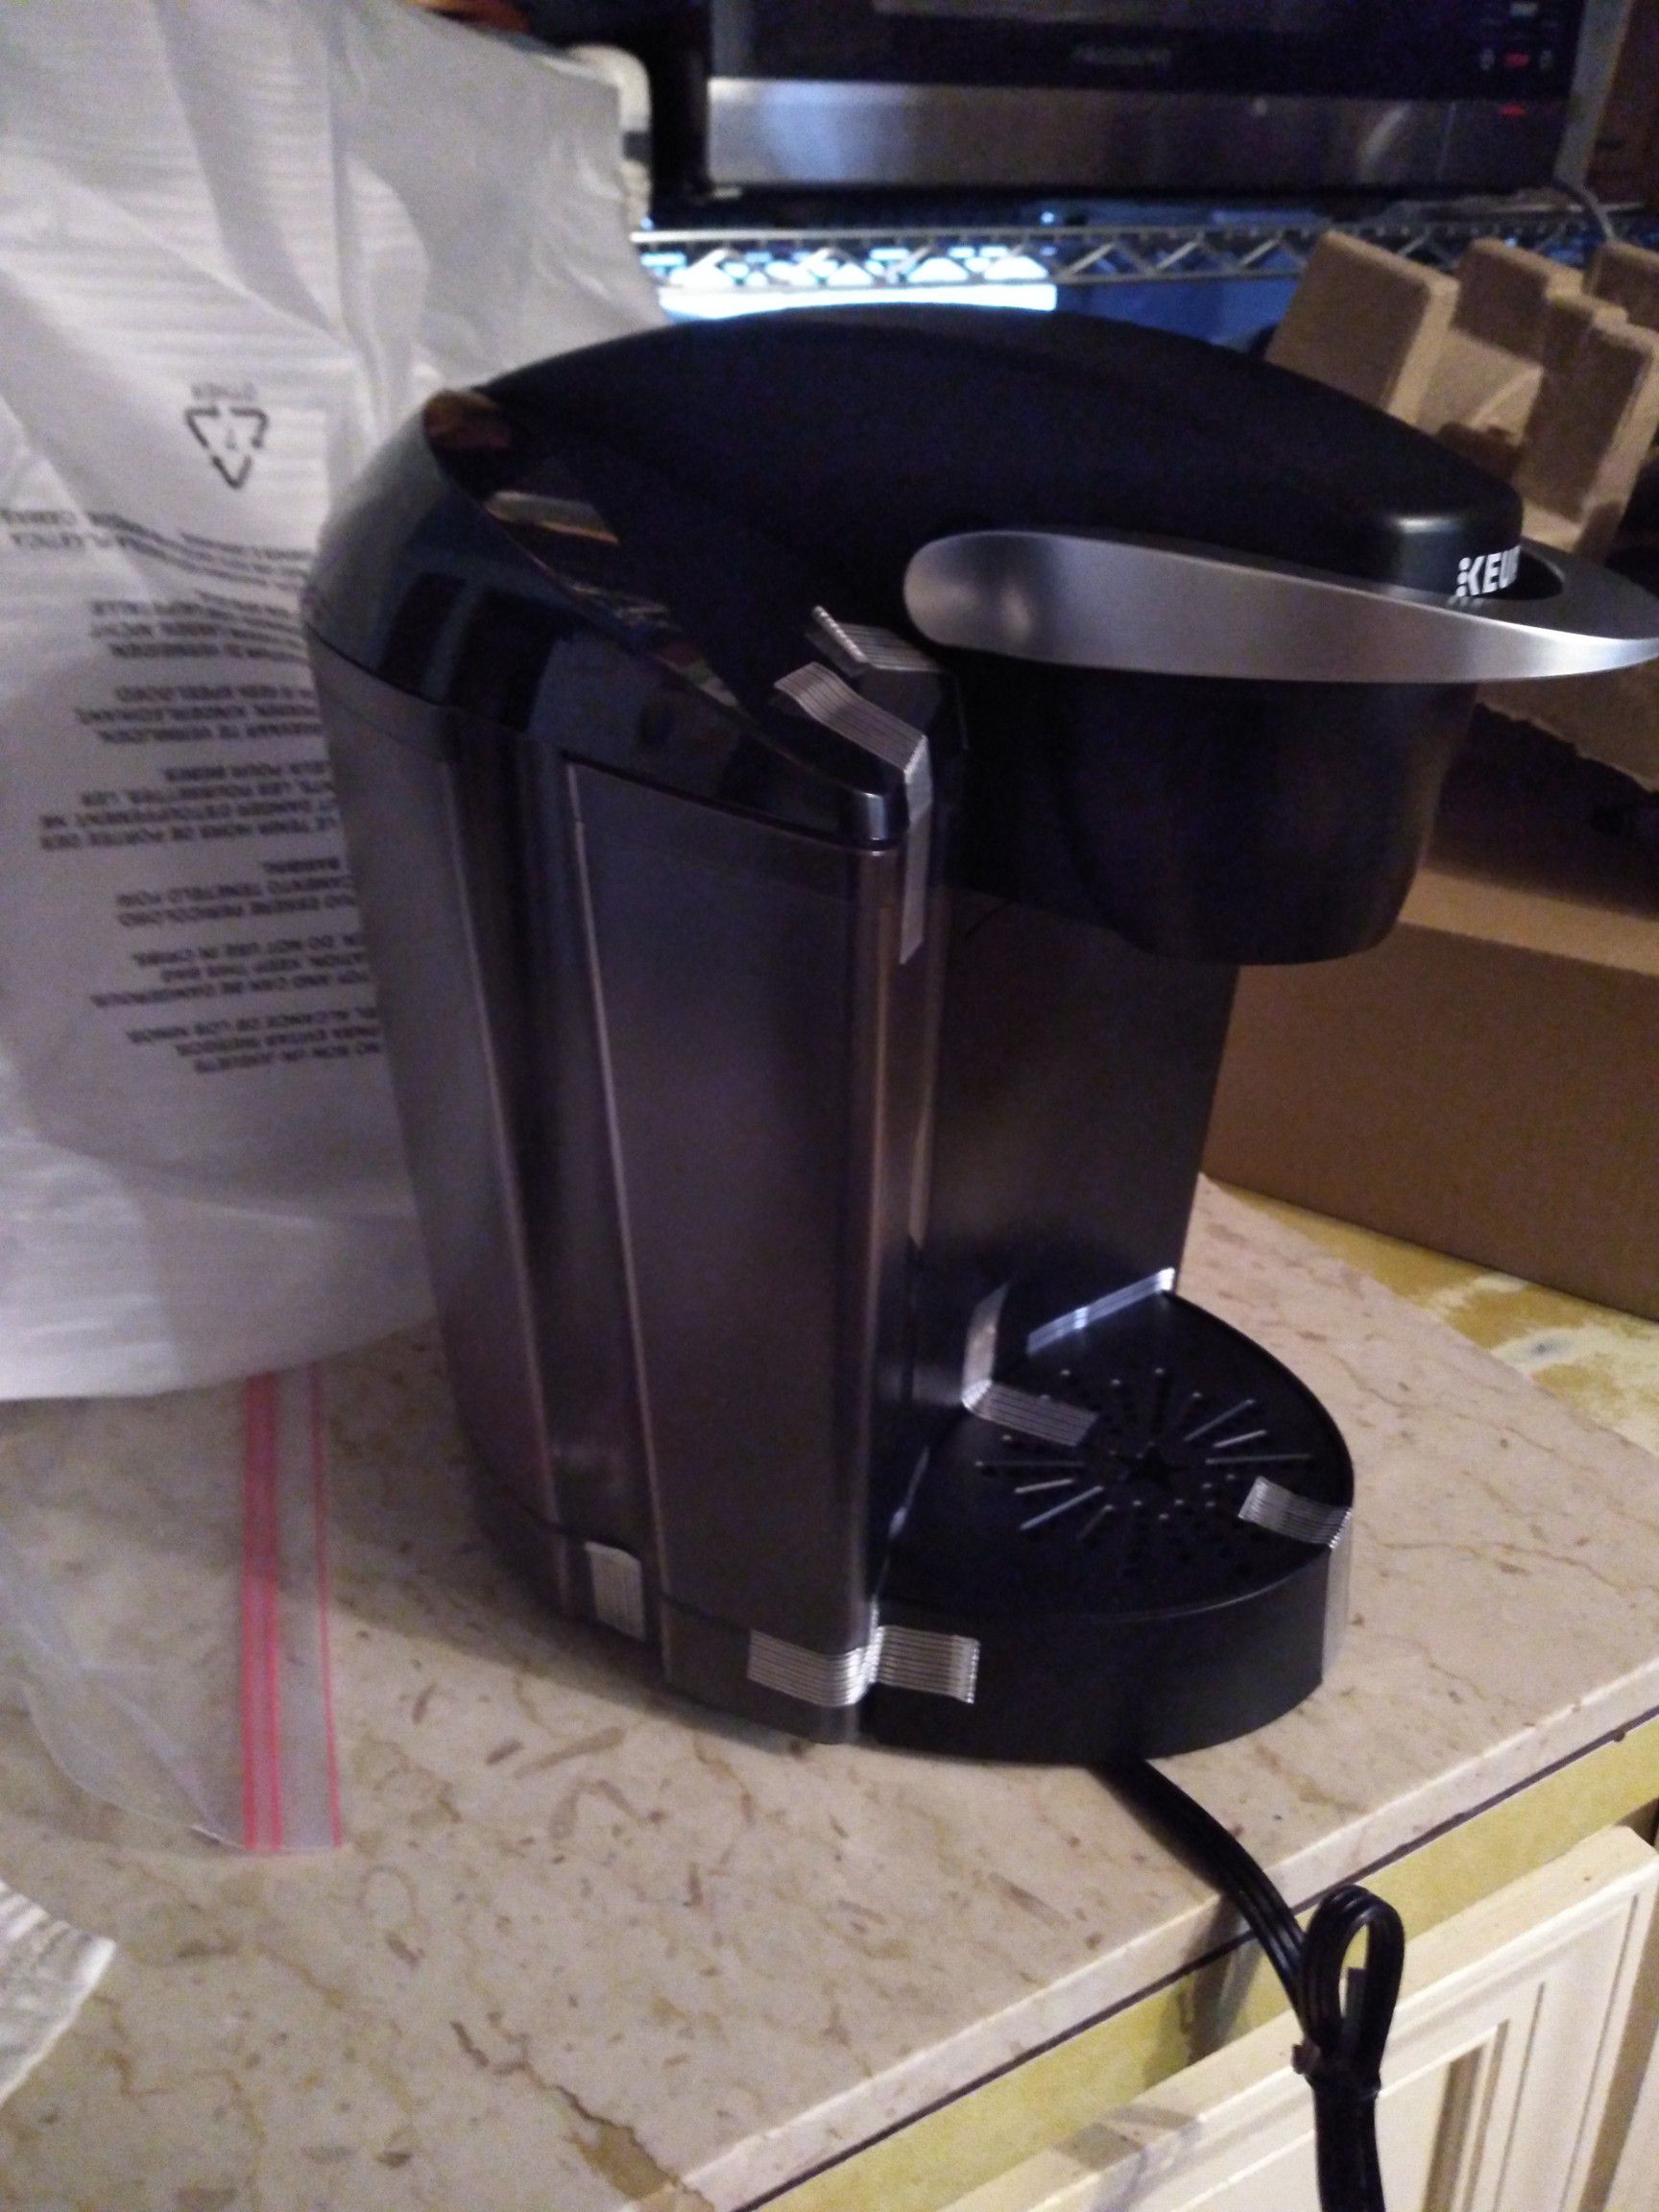 Keurig classic coffee maker never been used had 2 days realized I had one so I'm selling it for $100